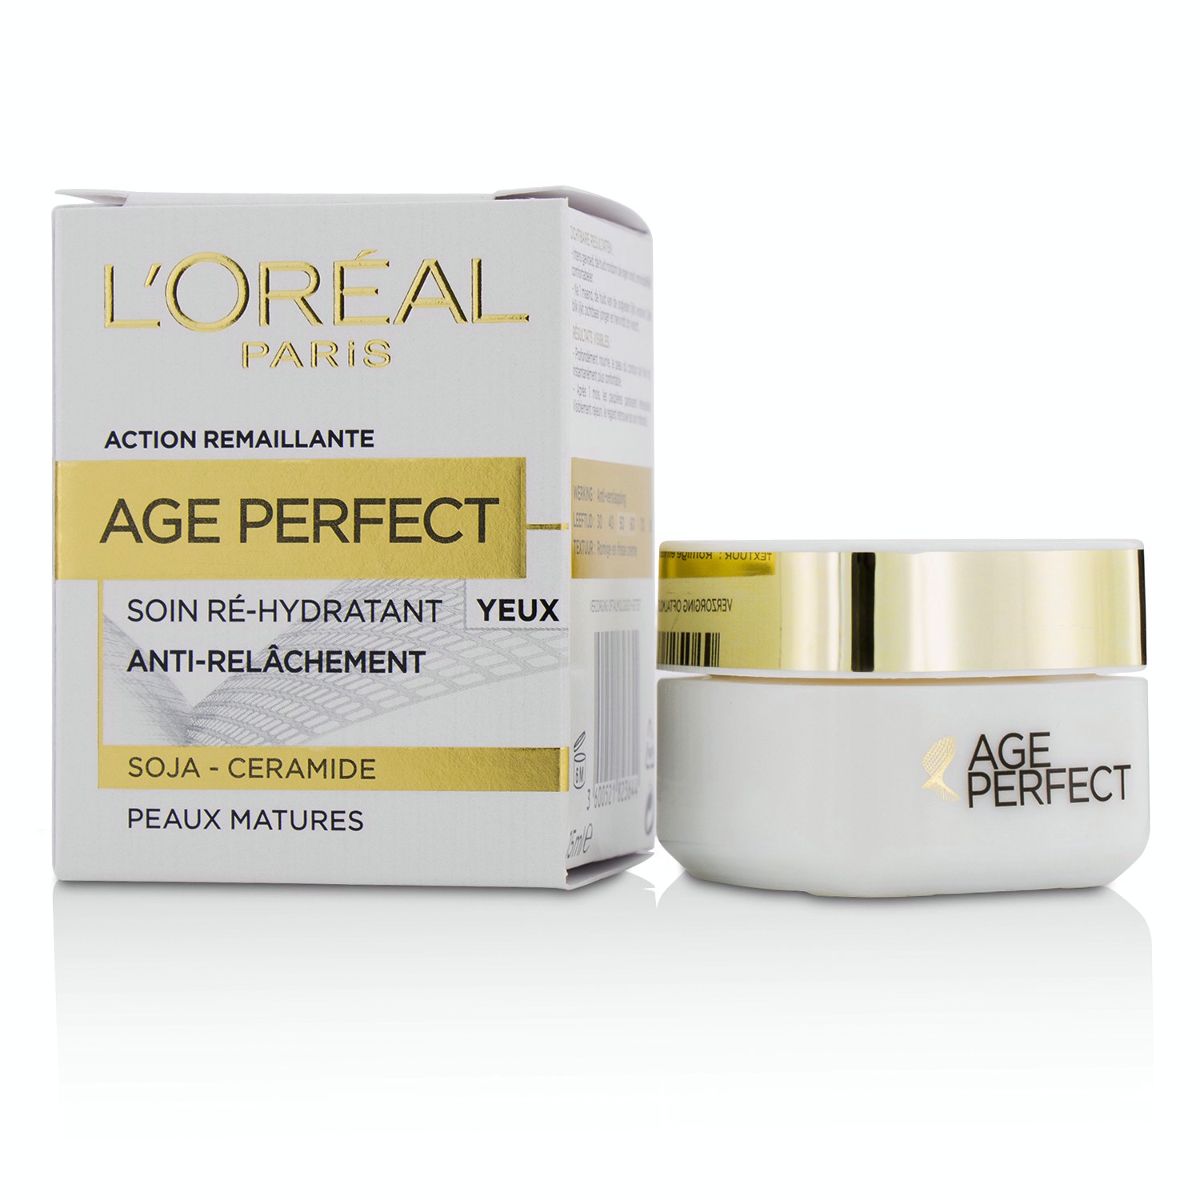 Age Perfect Re-Hydrating Eye Cream - For Mature Skin LOreal Image